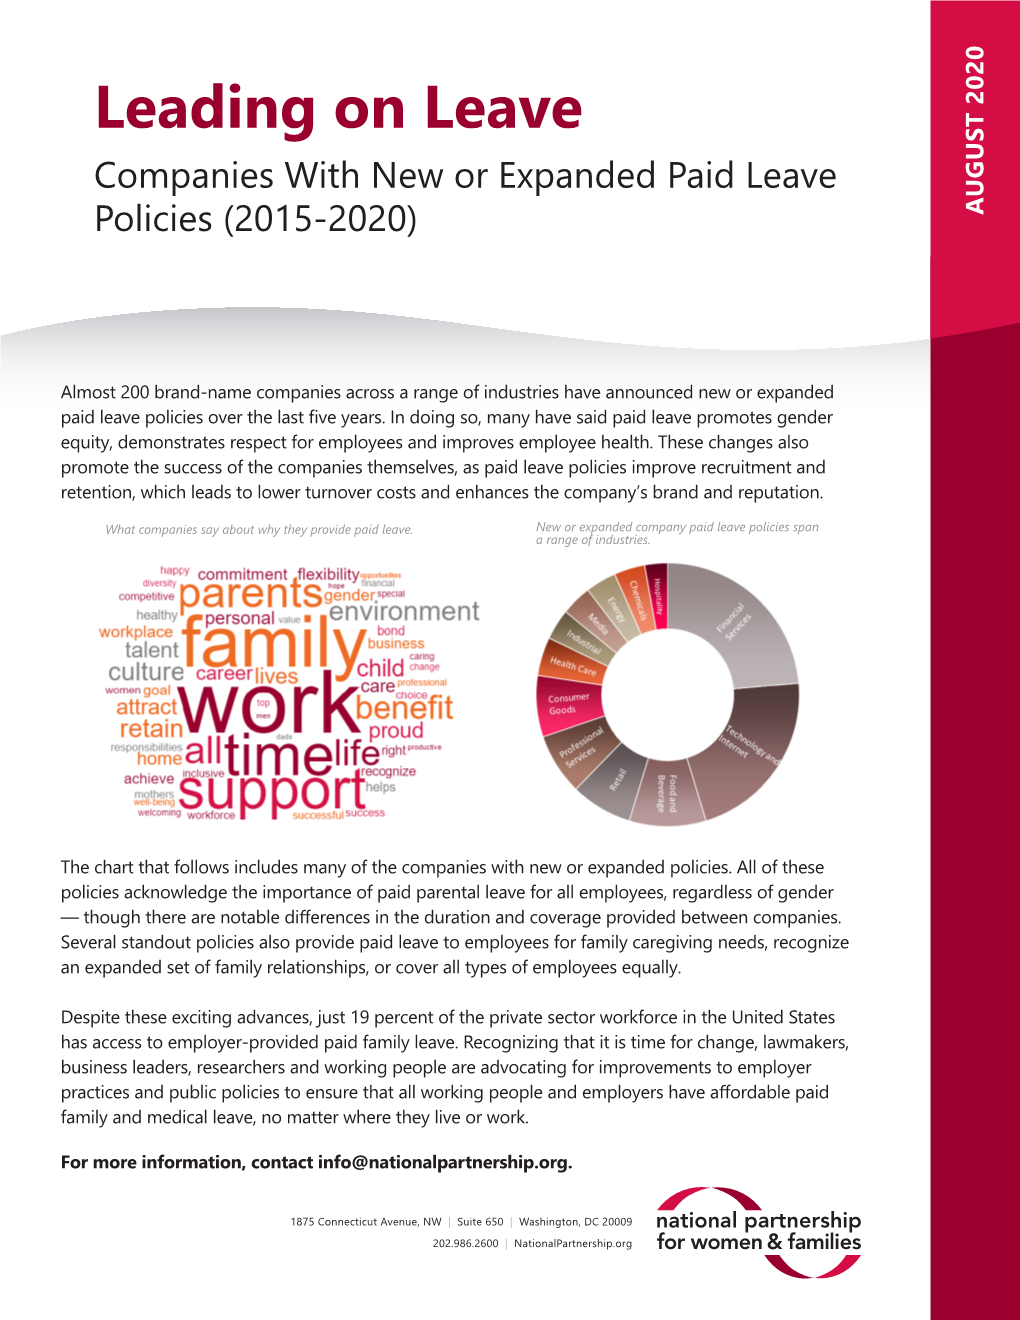 Companies with New Or Expanded Paid Leave Policies (2015-2020) 2